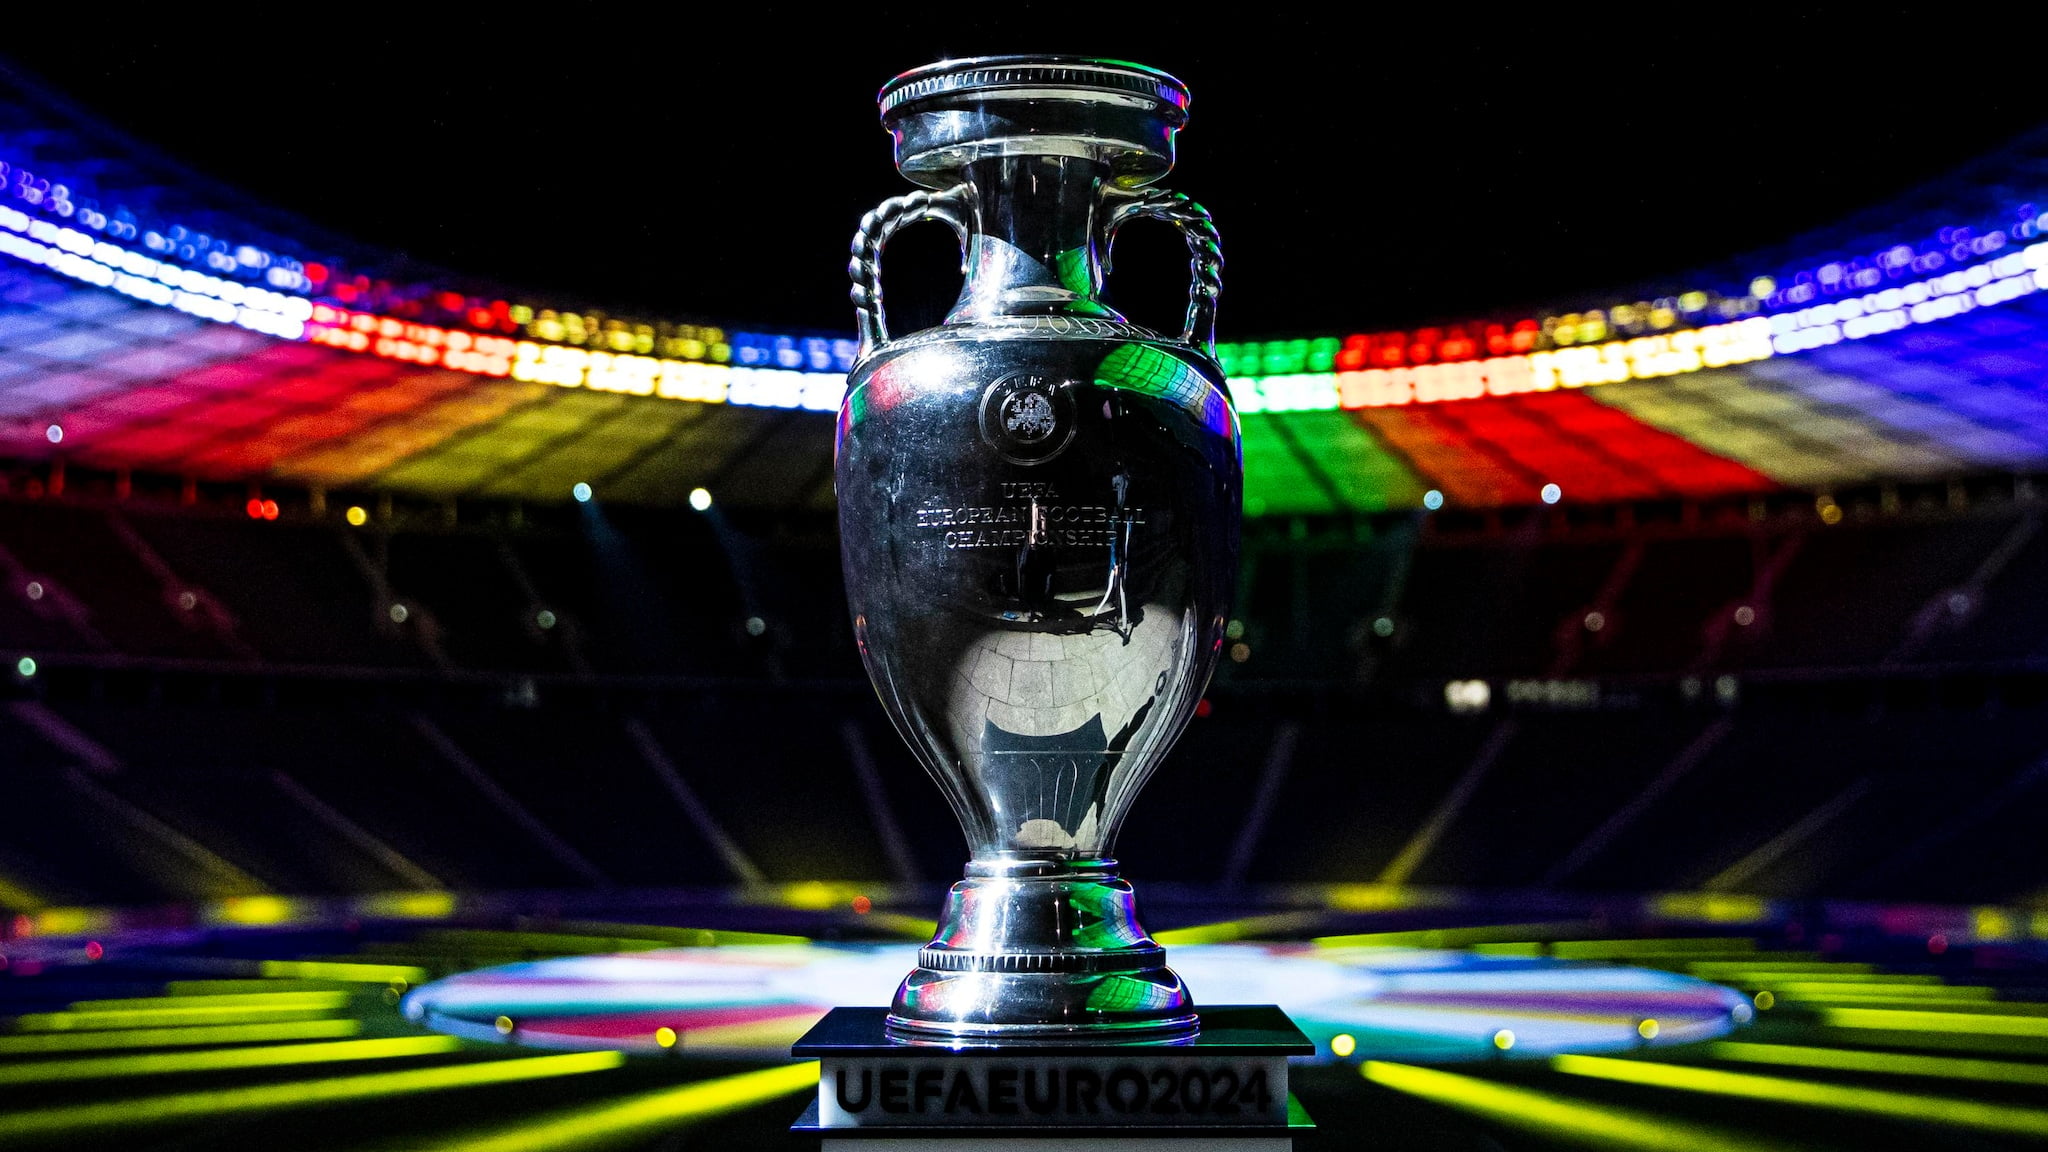 France, Portugal, two other teams qualify for Euro 2024 ( Full list)